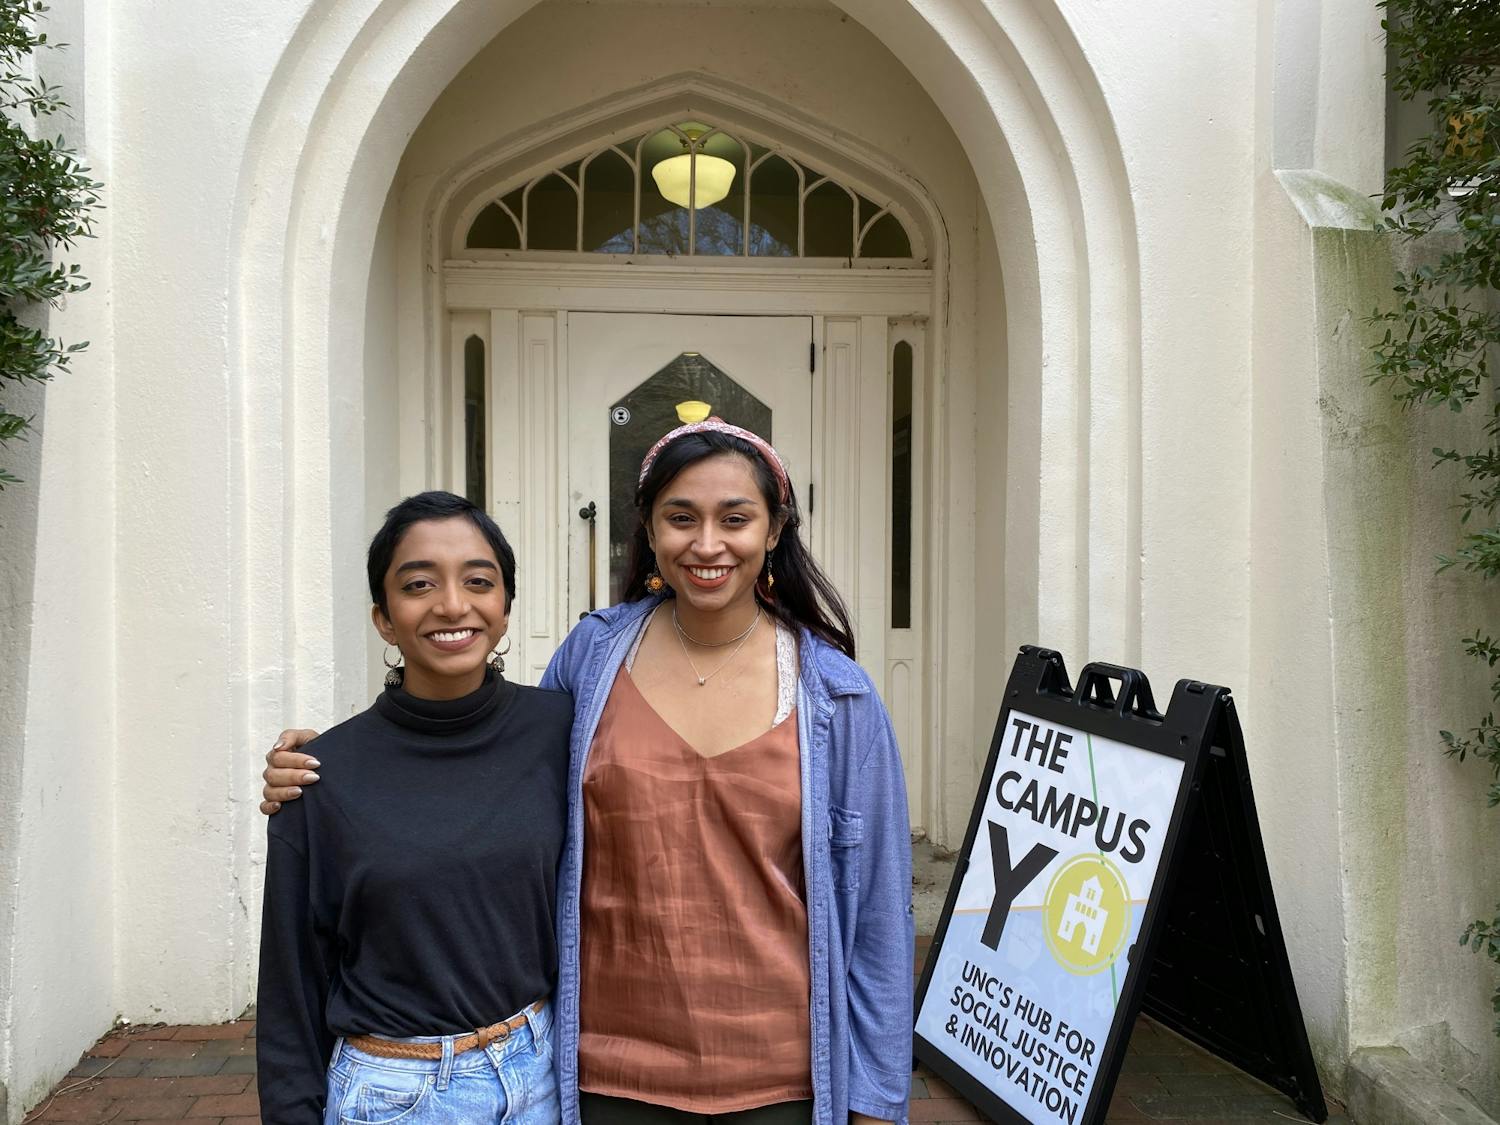 Veda Patil, a political science major, and Thilini Weerakkody, a human development and family studies major, are running for co-presidents of the Campus Y. 